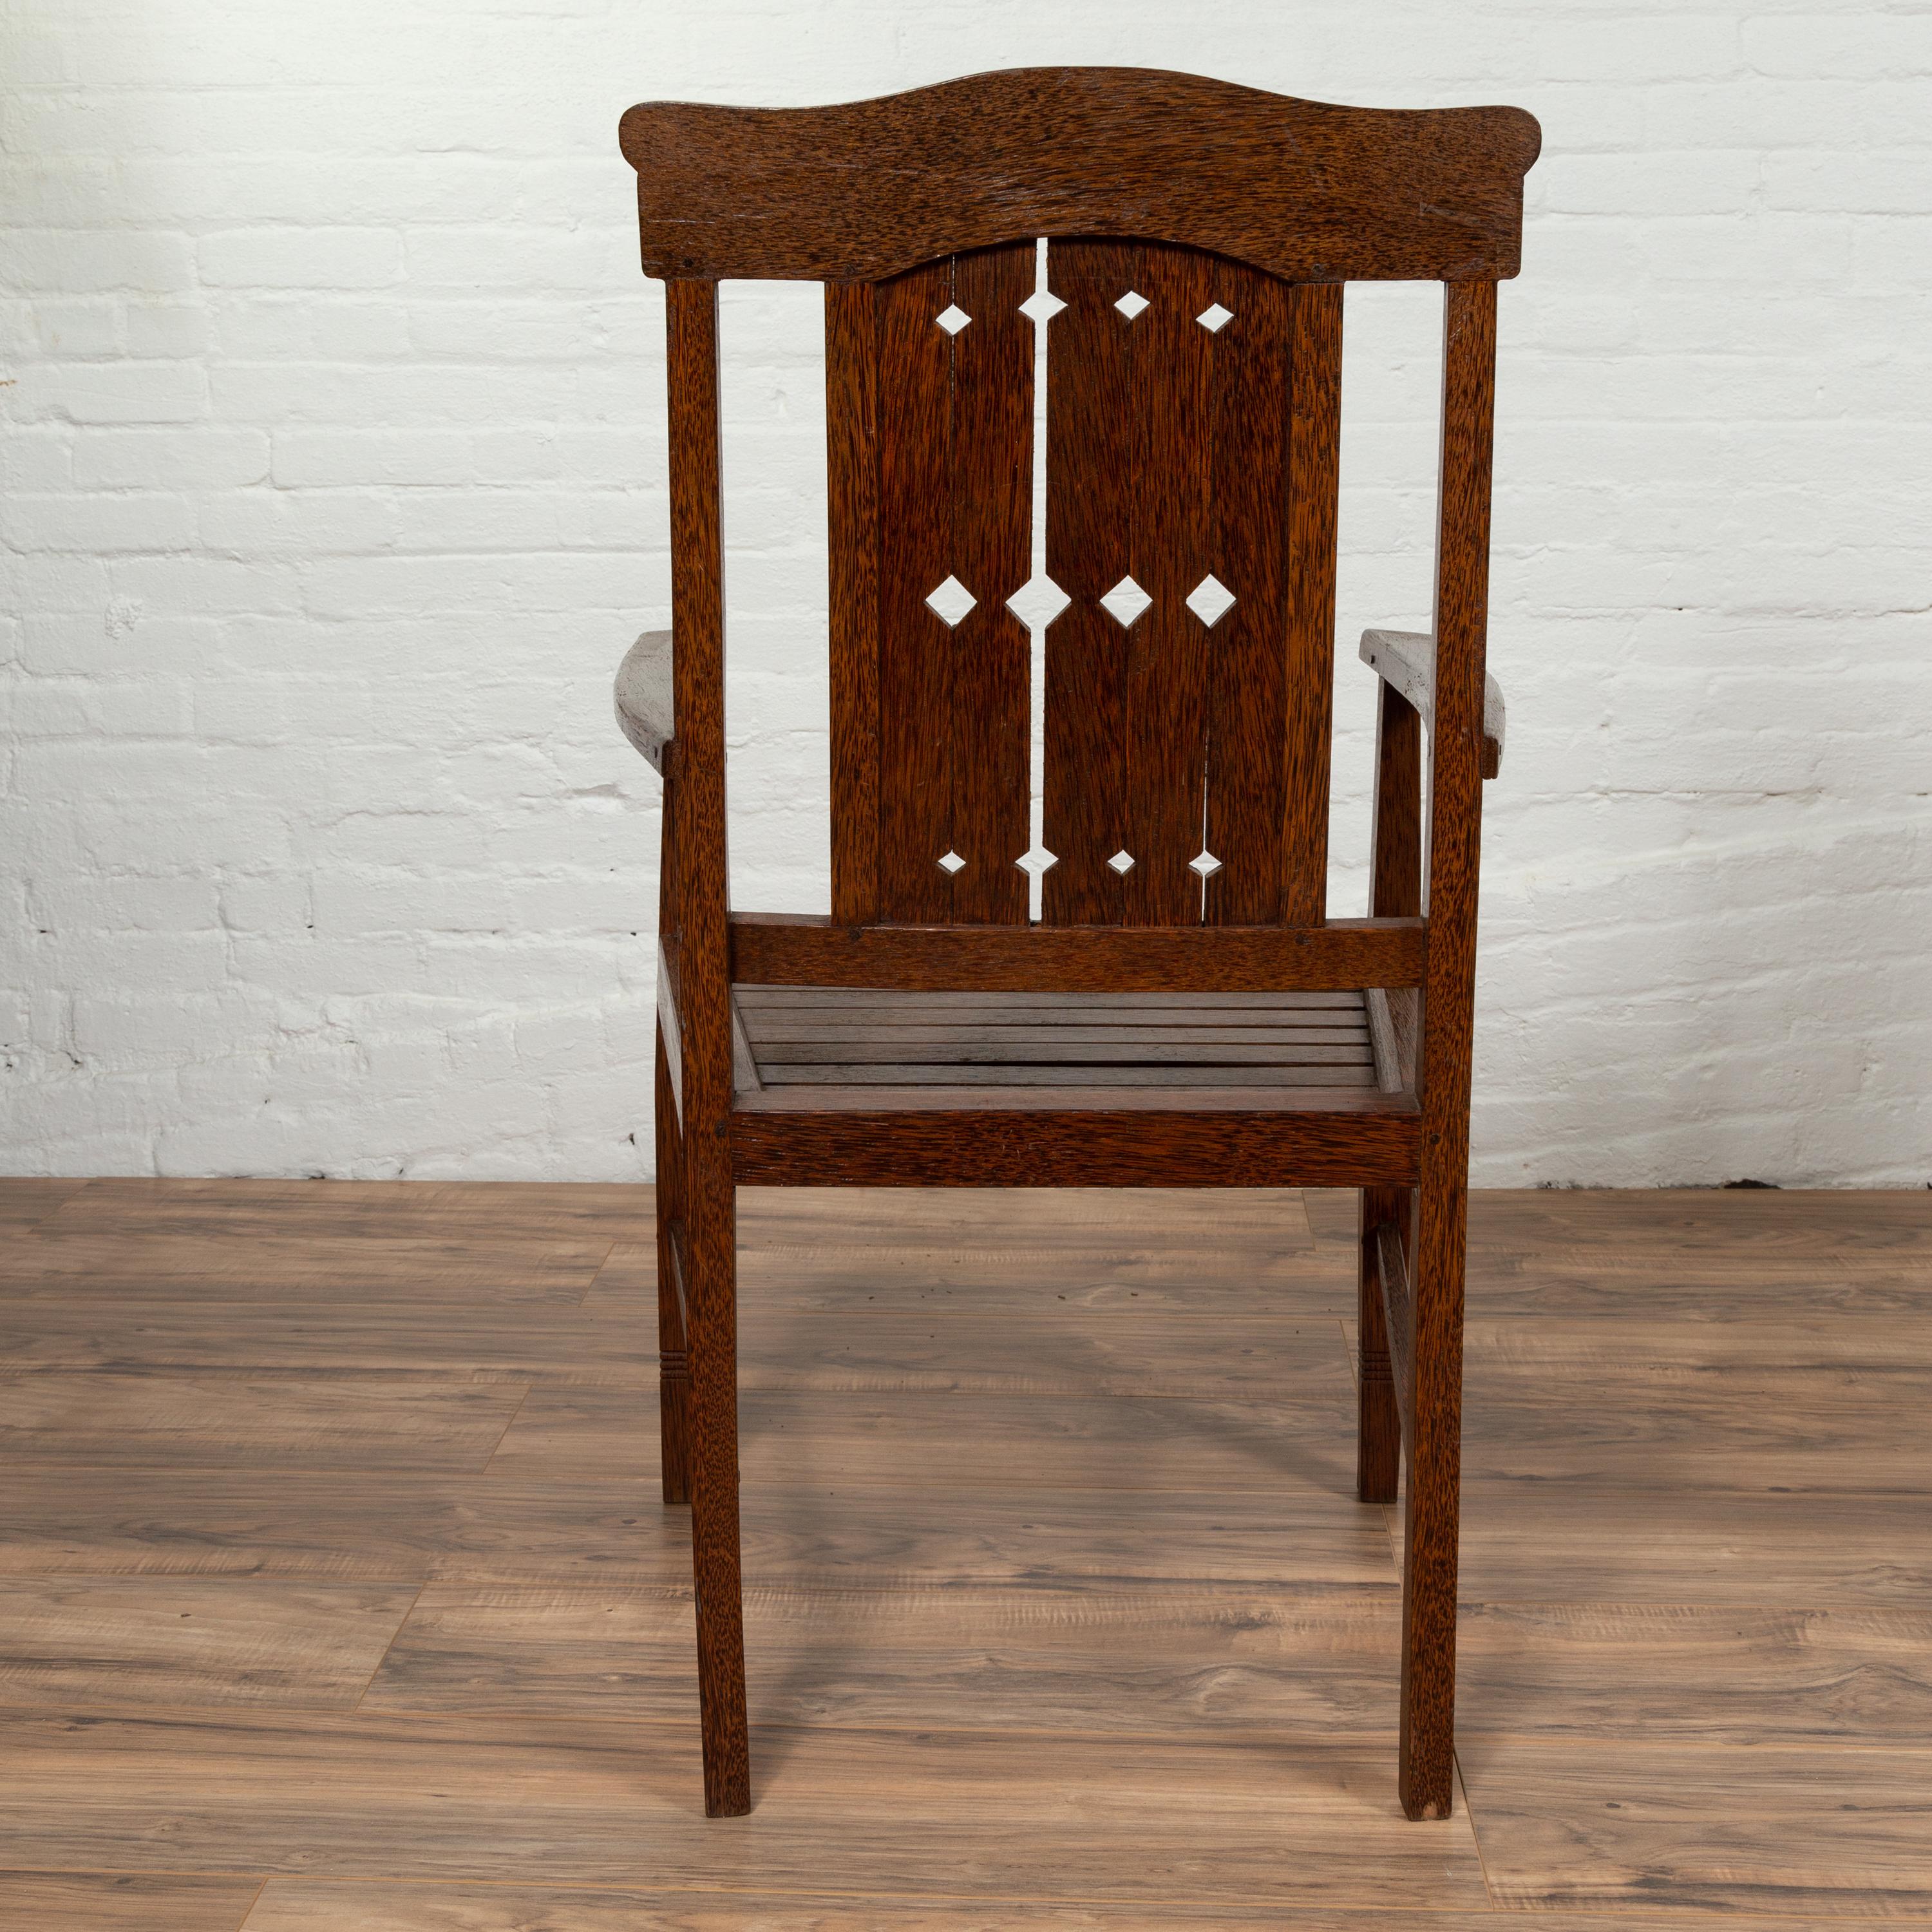 20th Century Vintage Dutch Colonial Armchair with Pierced Wooden Slats and Bonnet-Style Rail For Sale